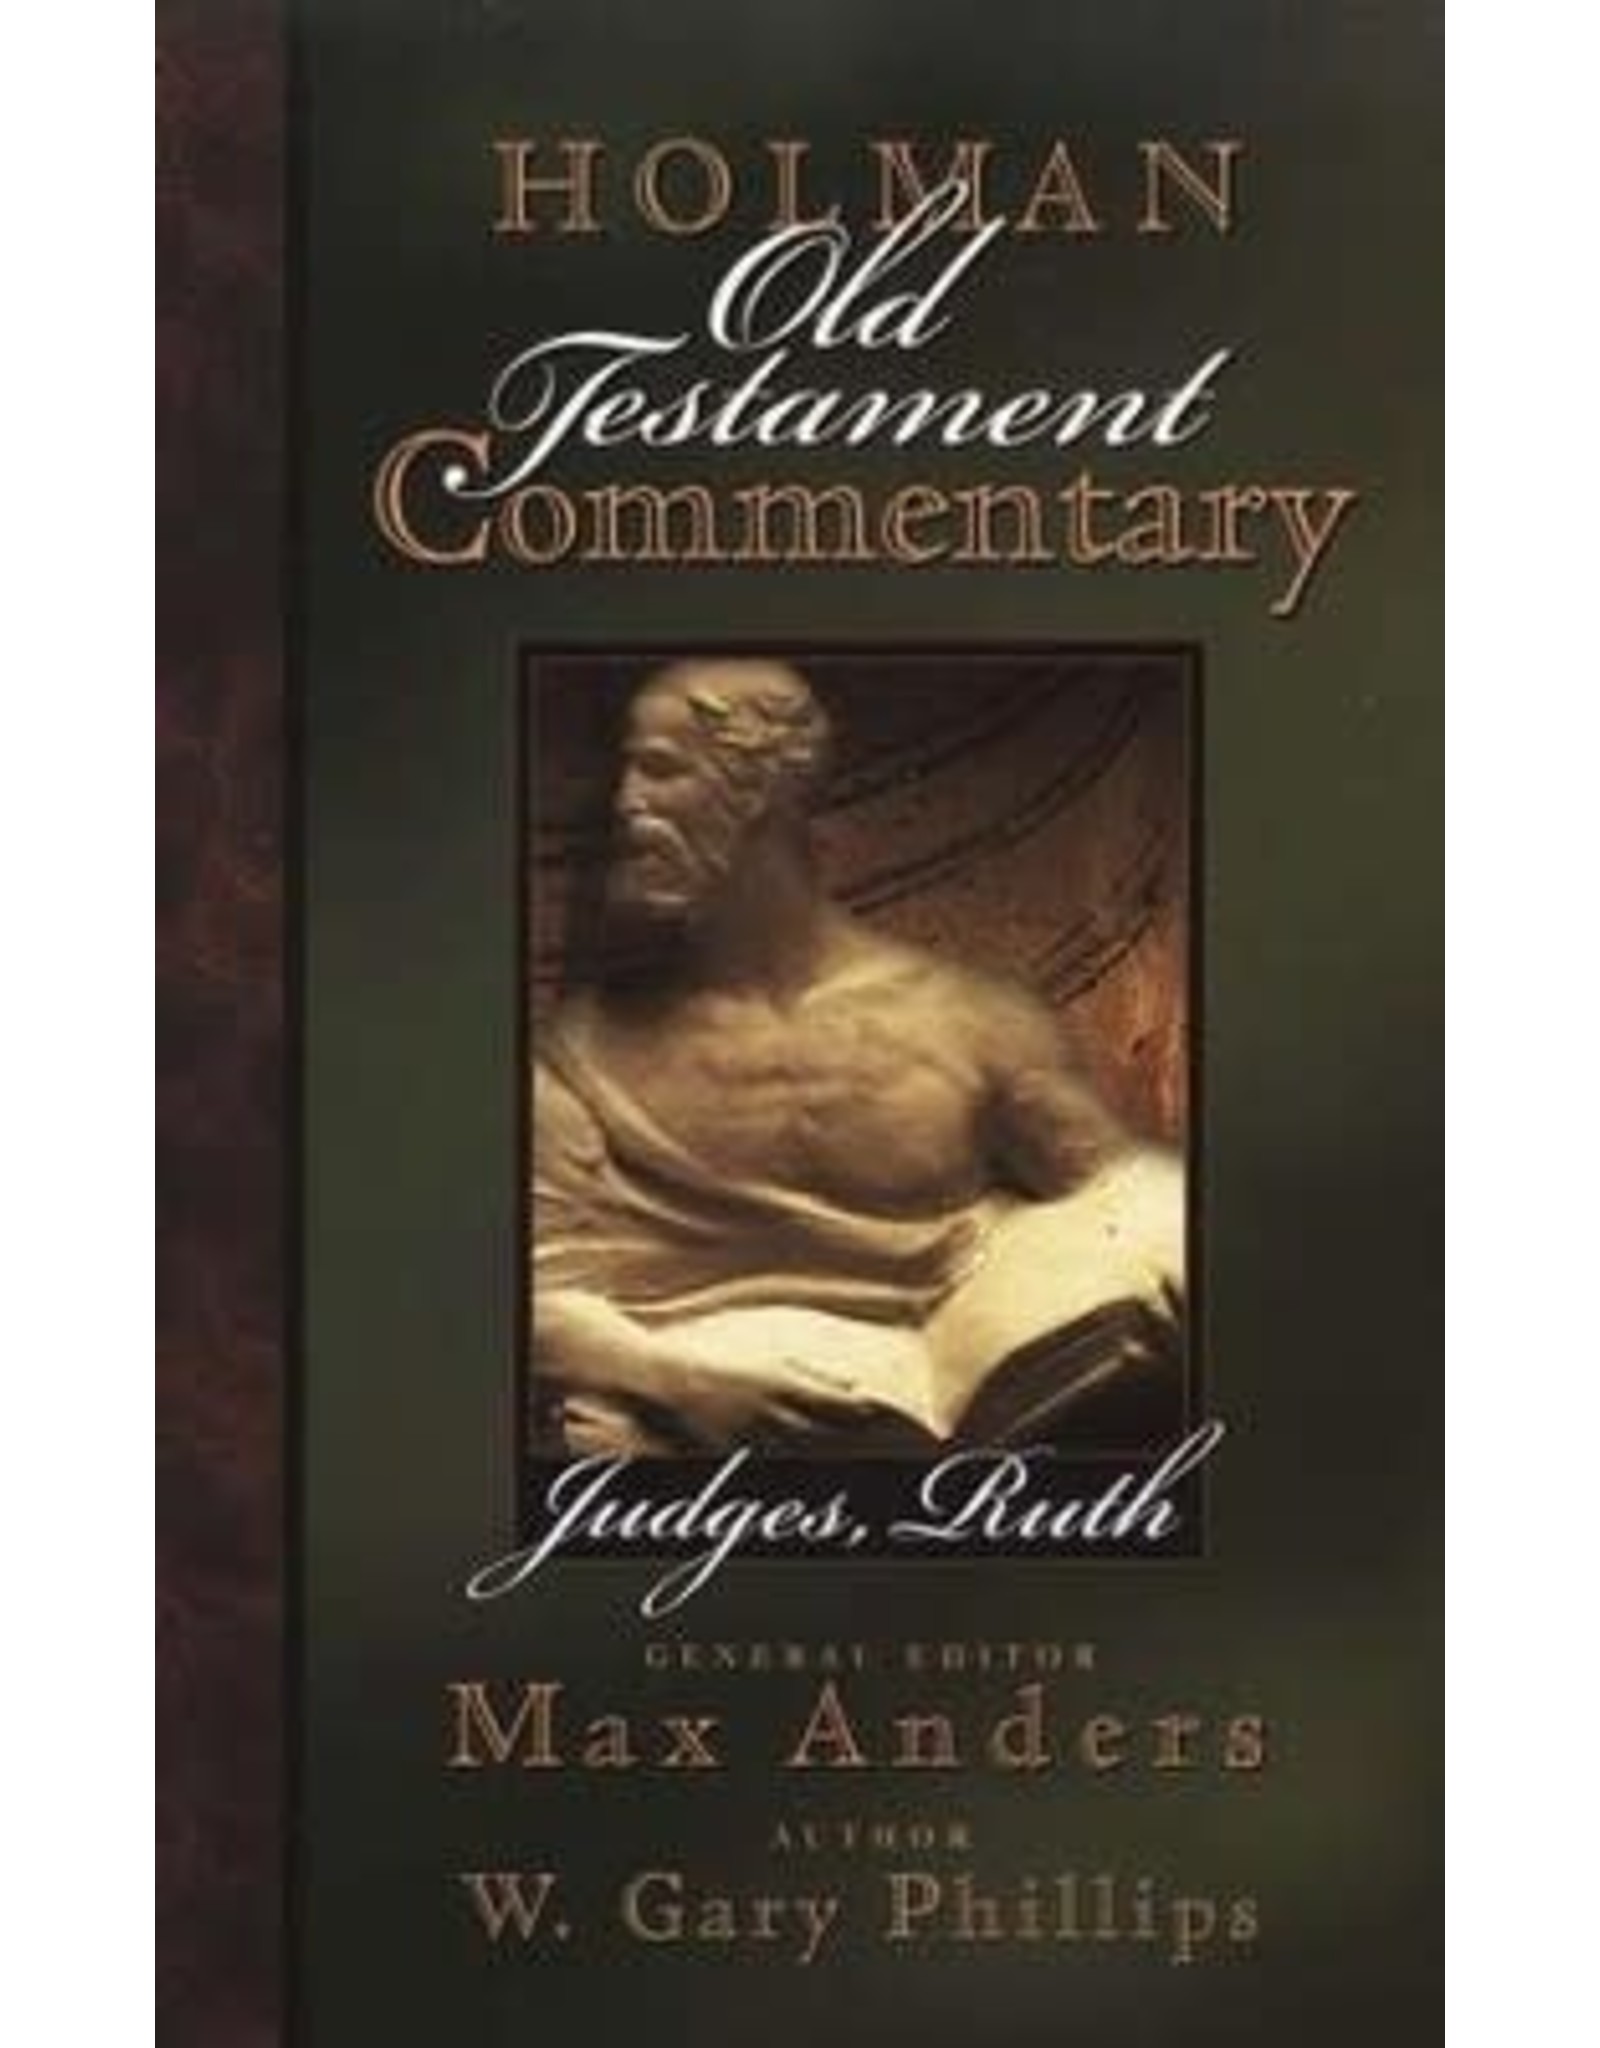 Max Anders & W Gray Phillips Holman Old Testament Commentary - Judges, Ruth